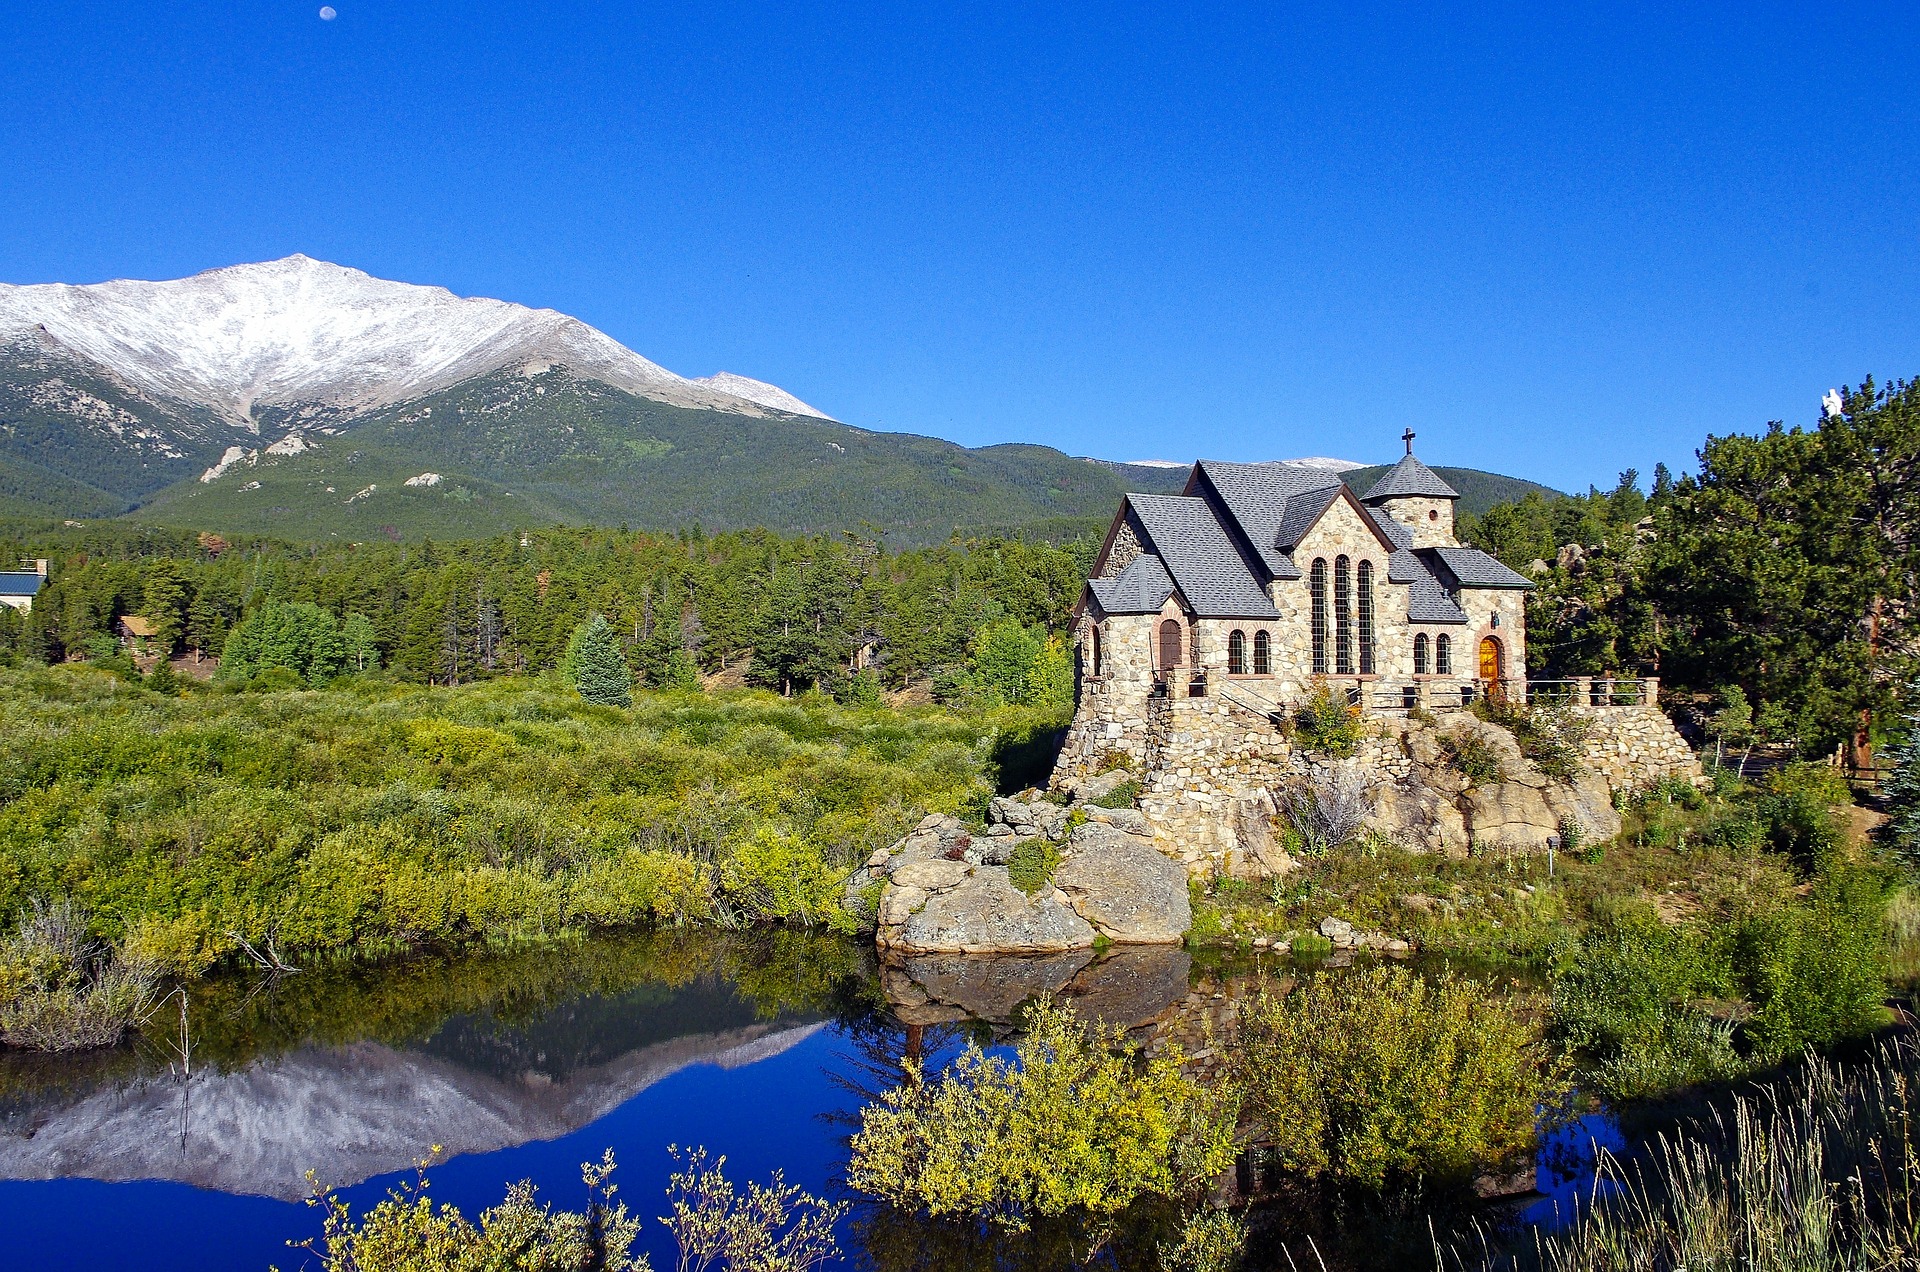 The Chapel on the Rock is a functioning Catholic chapel and tourist landmark in Allenspark, Colorado, pictured here with a white-capped mountain in the distance.